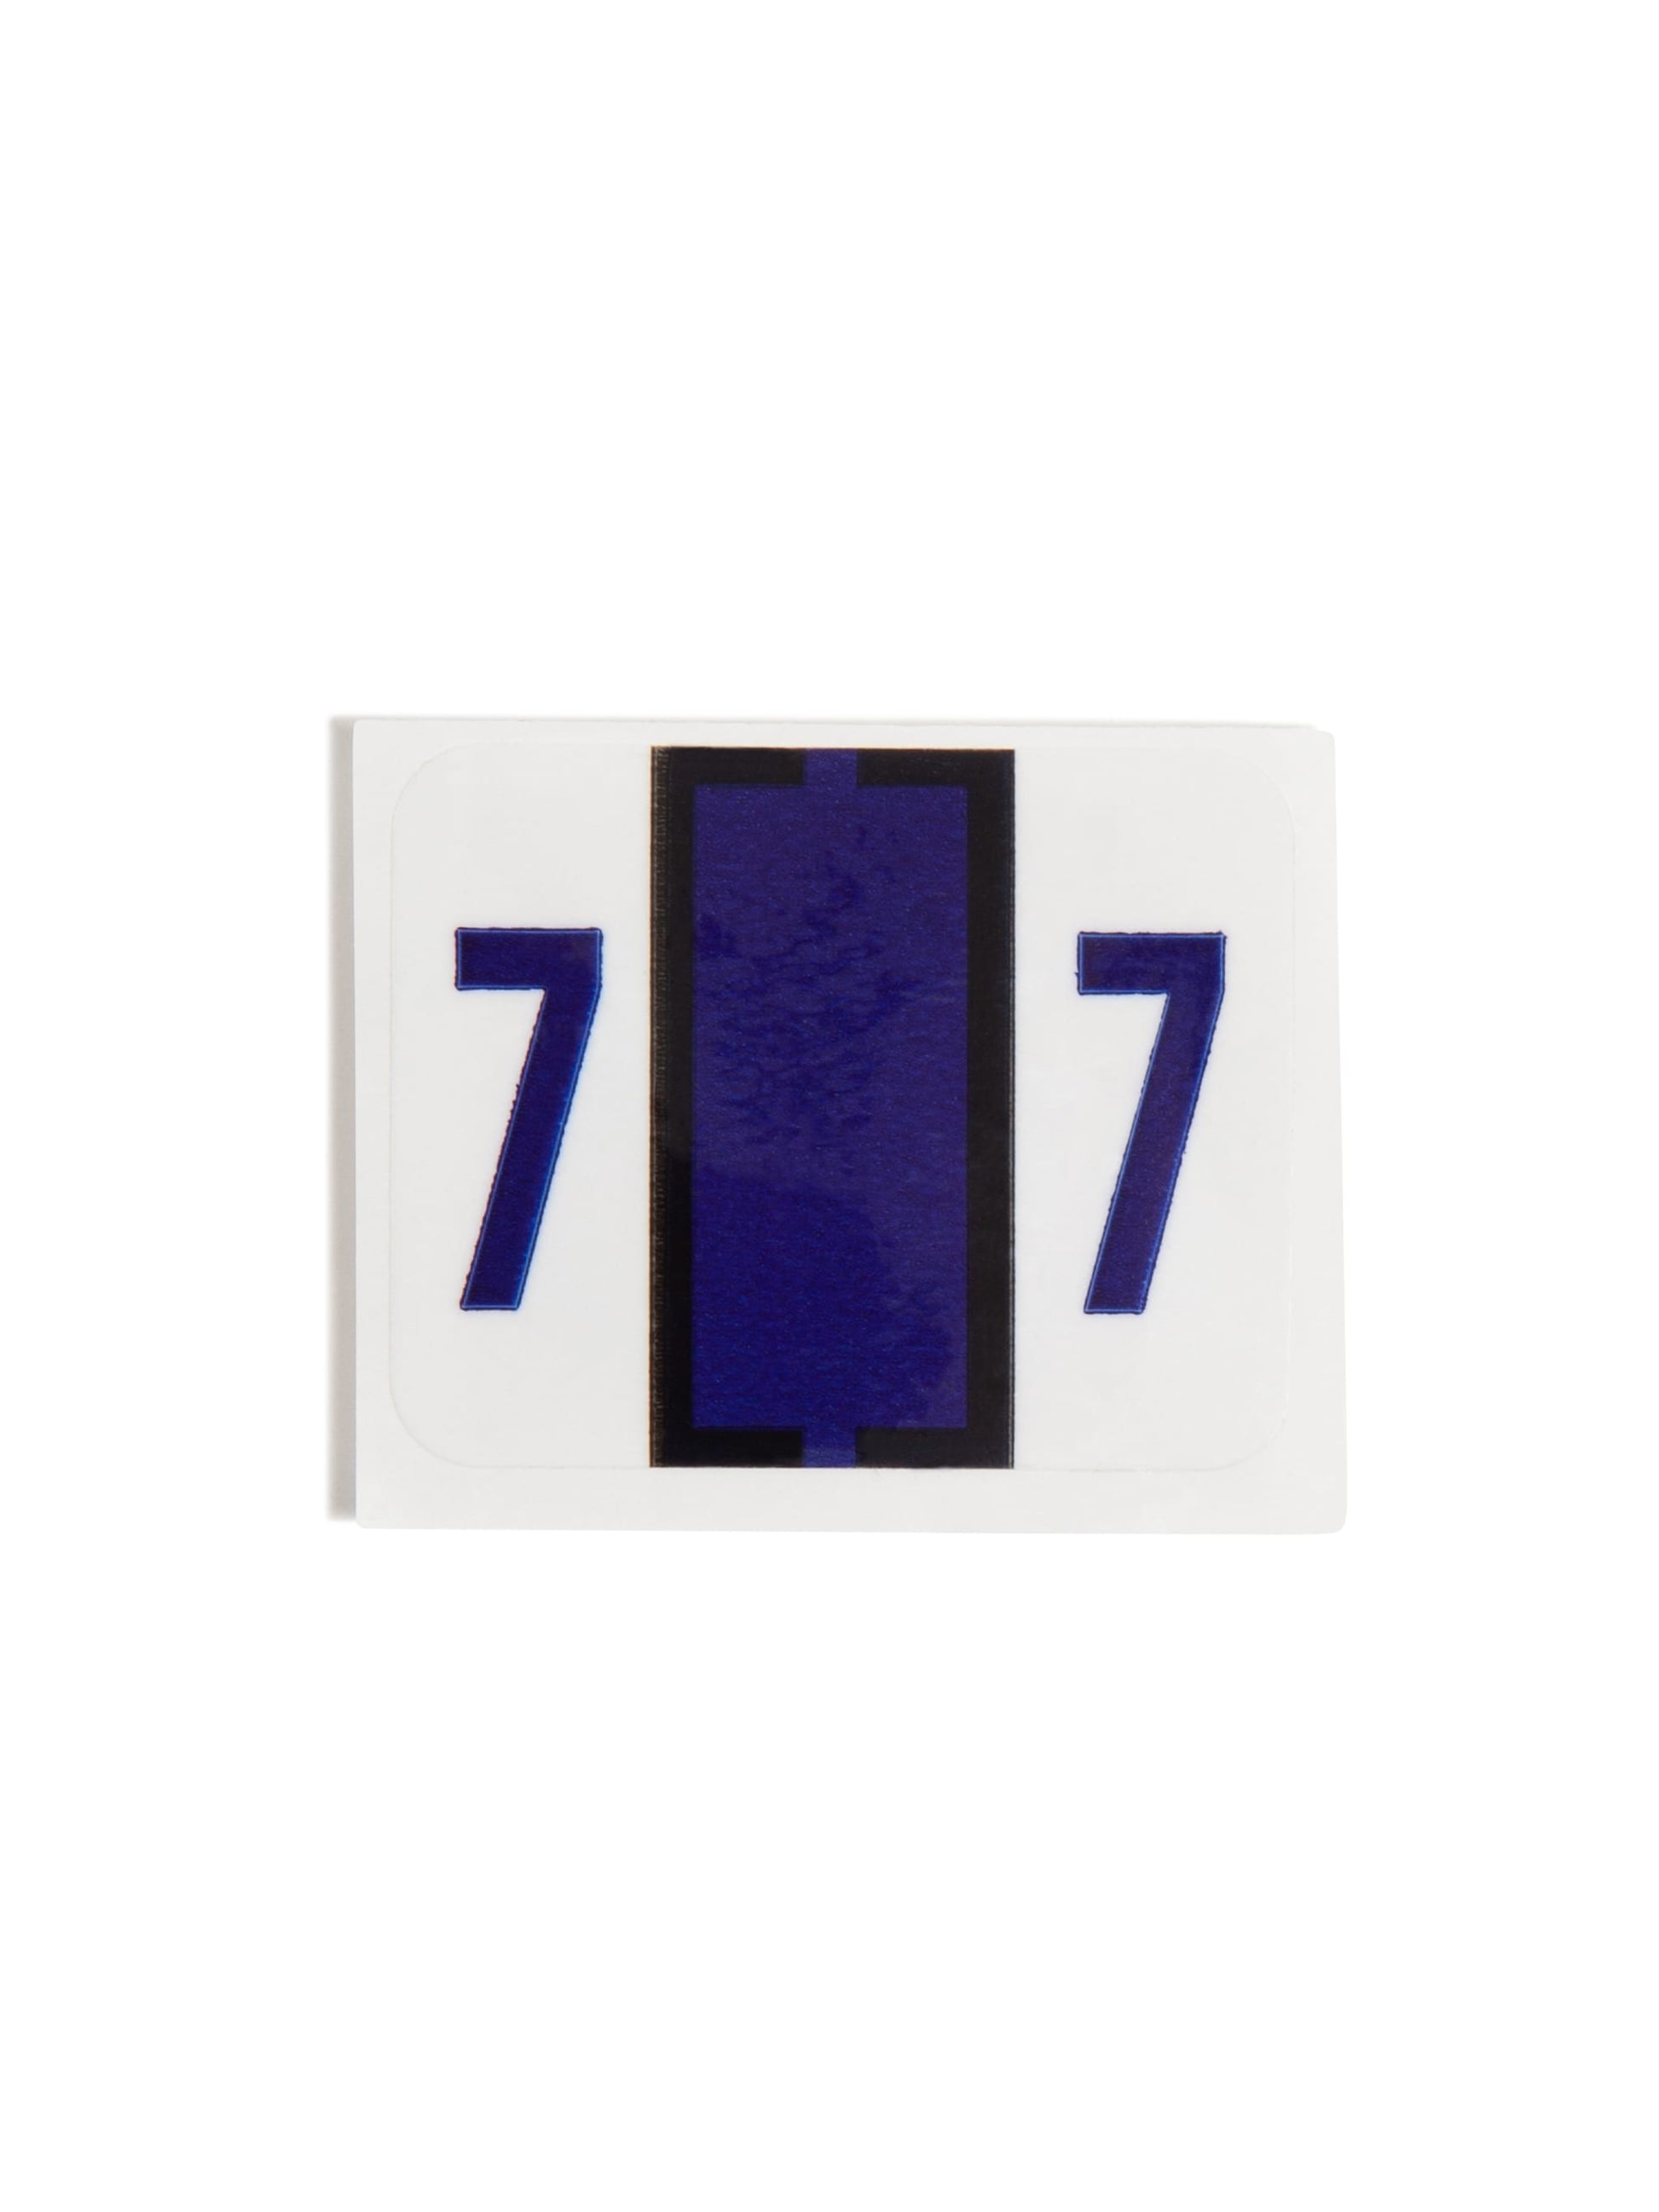 BCCRN Bar Style Color-Coded Numeric Labels, 0-9 Rolls, Purple Color, 1-1/4" X 1" Size, Set of 1, 086486673778